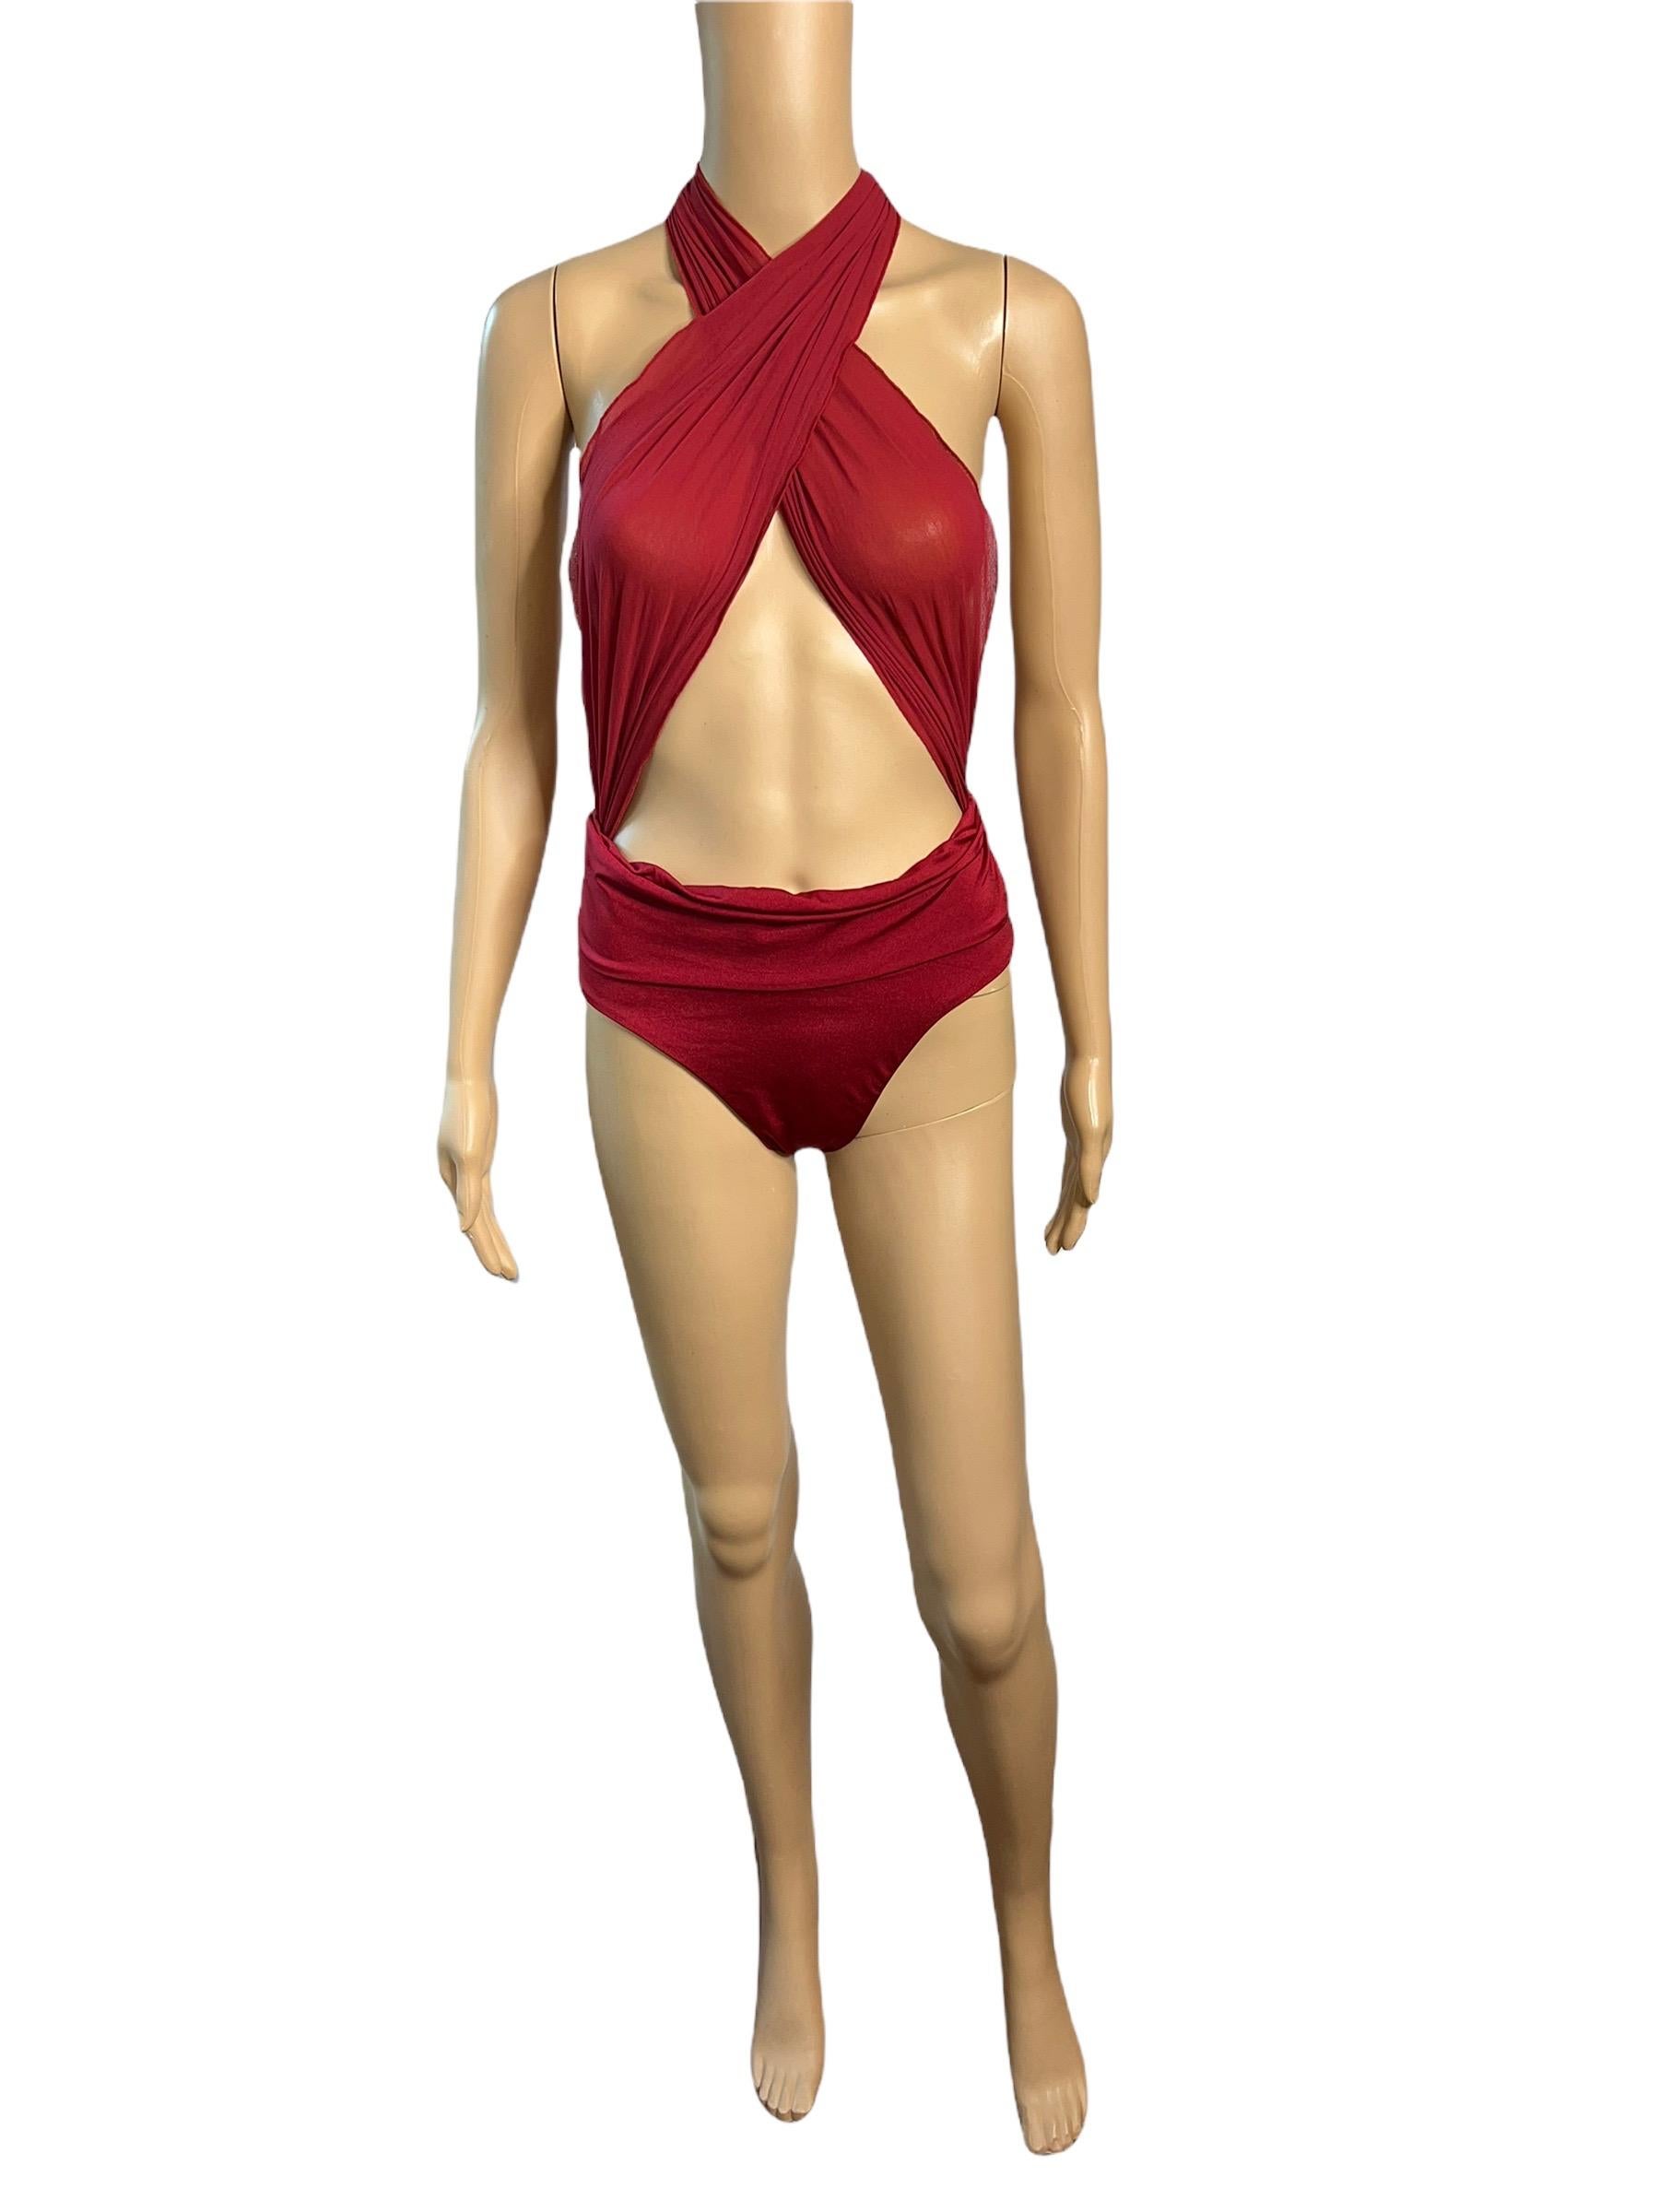 Tom Ford for Gucci S/S 2001 Runway Sheer One Piece Bodysuit Swimsuit Swimwear  In Good Condition In Naples, FL